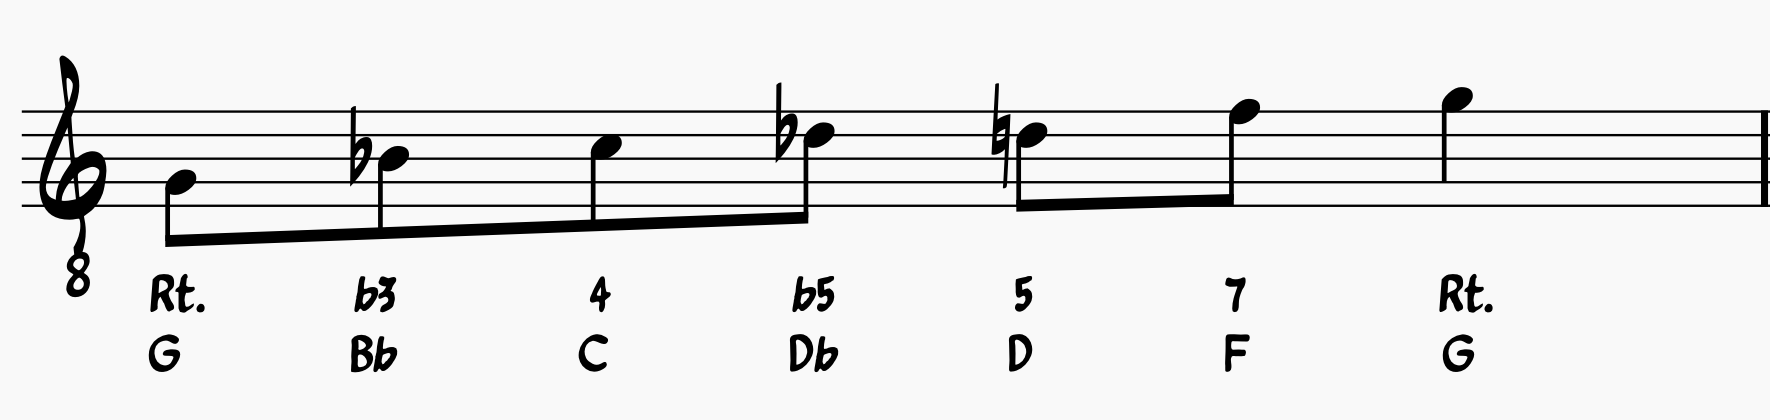 Blues Scale Guide: G minor blues scale